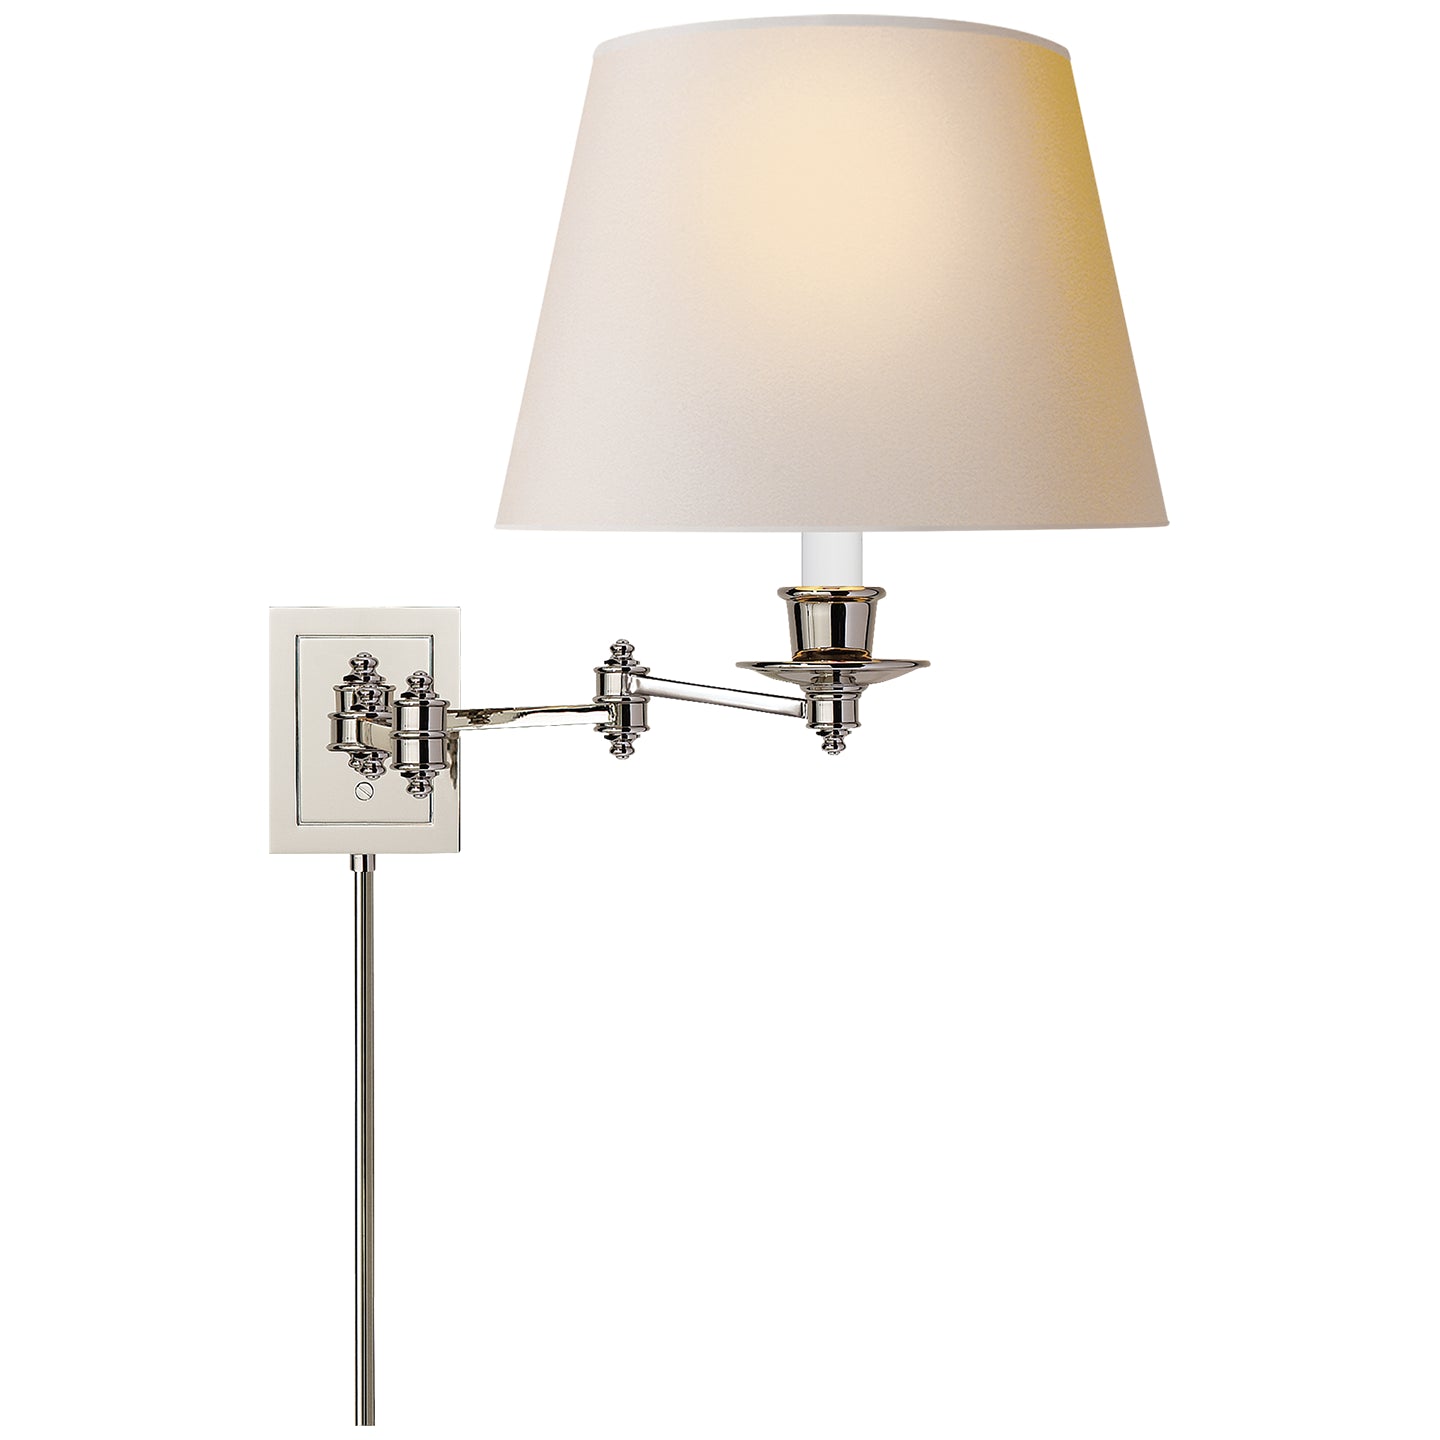 Visual Comfort Signature - S 2000PN-NP - One Light Wall Sconce - Swing Arm Sconce - Polished Nickel